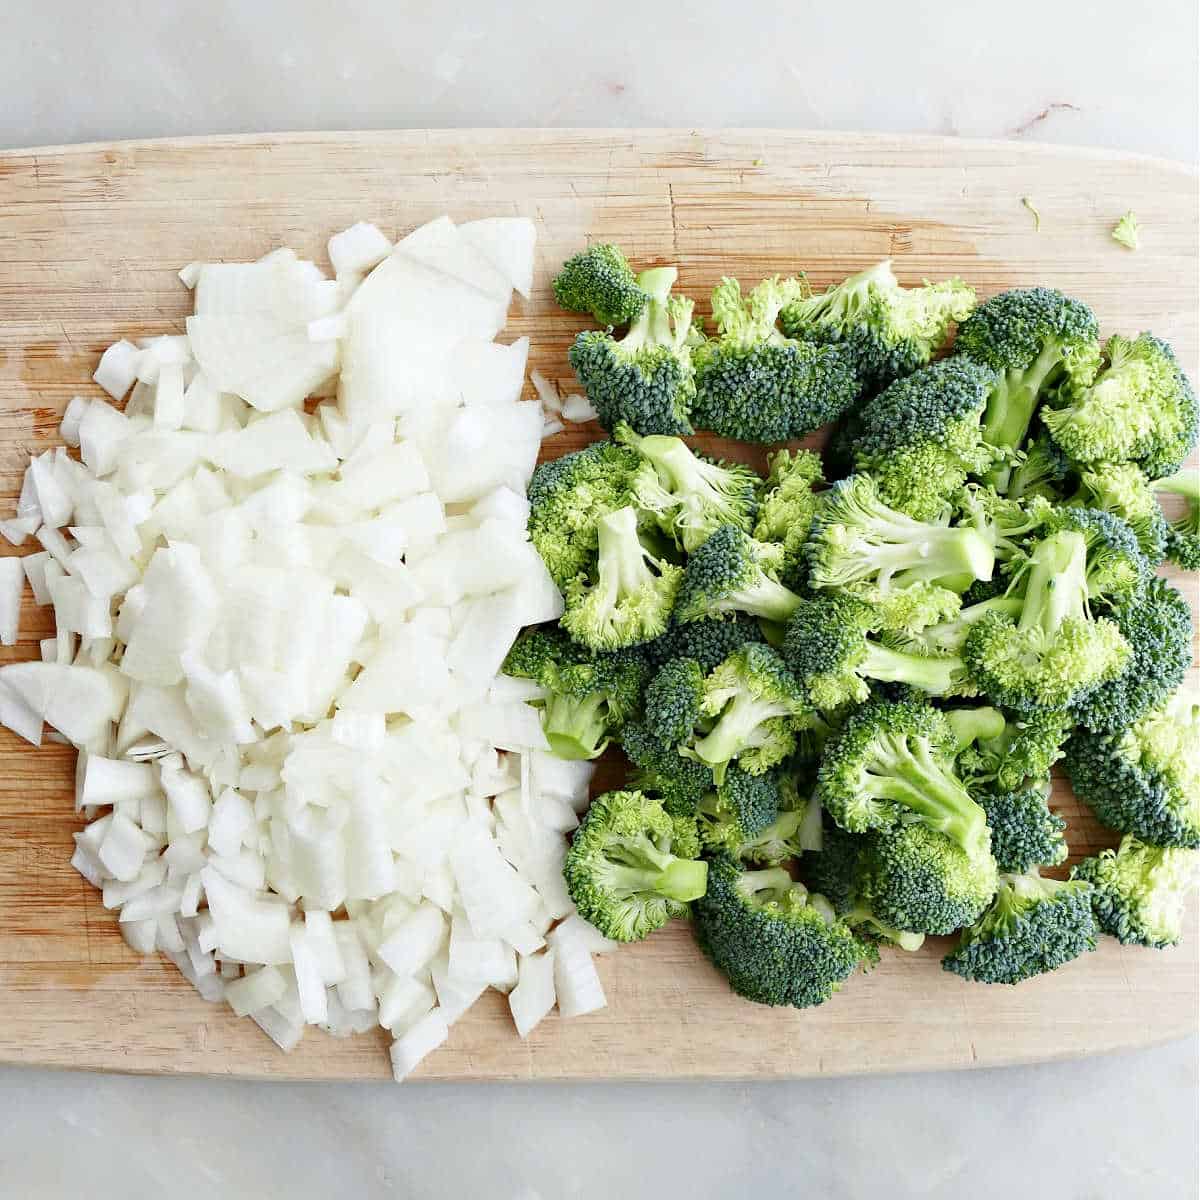 diced onion and chopped broccoli on a bamboo cutting board